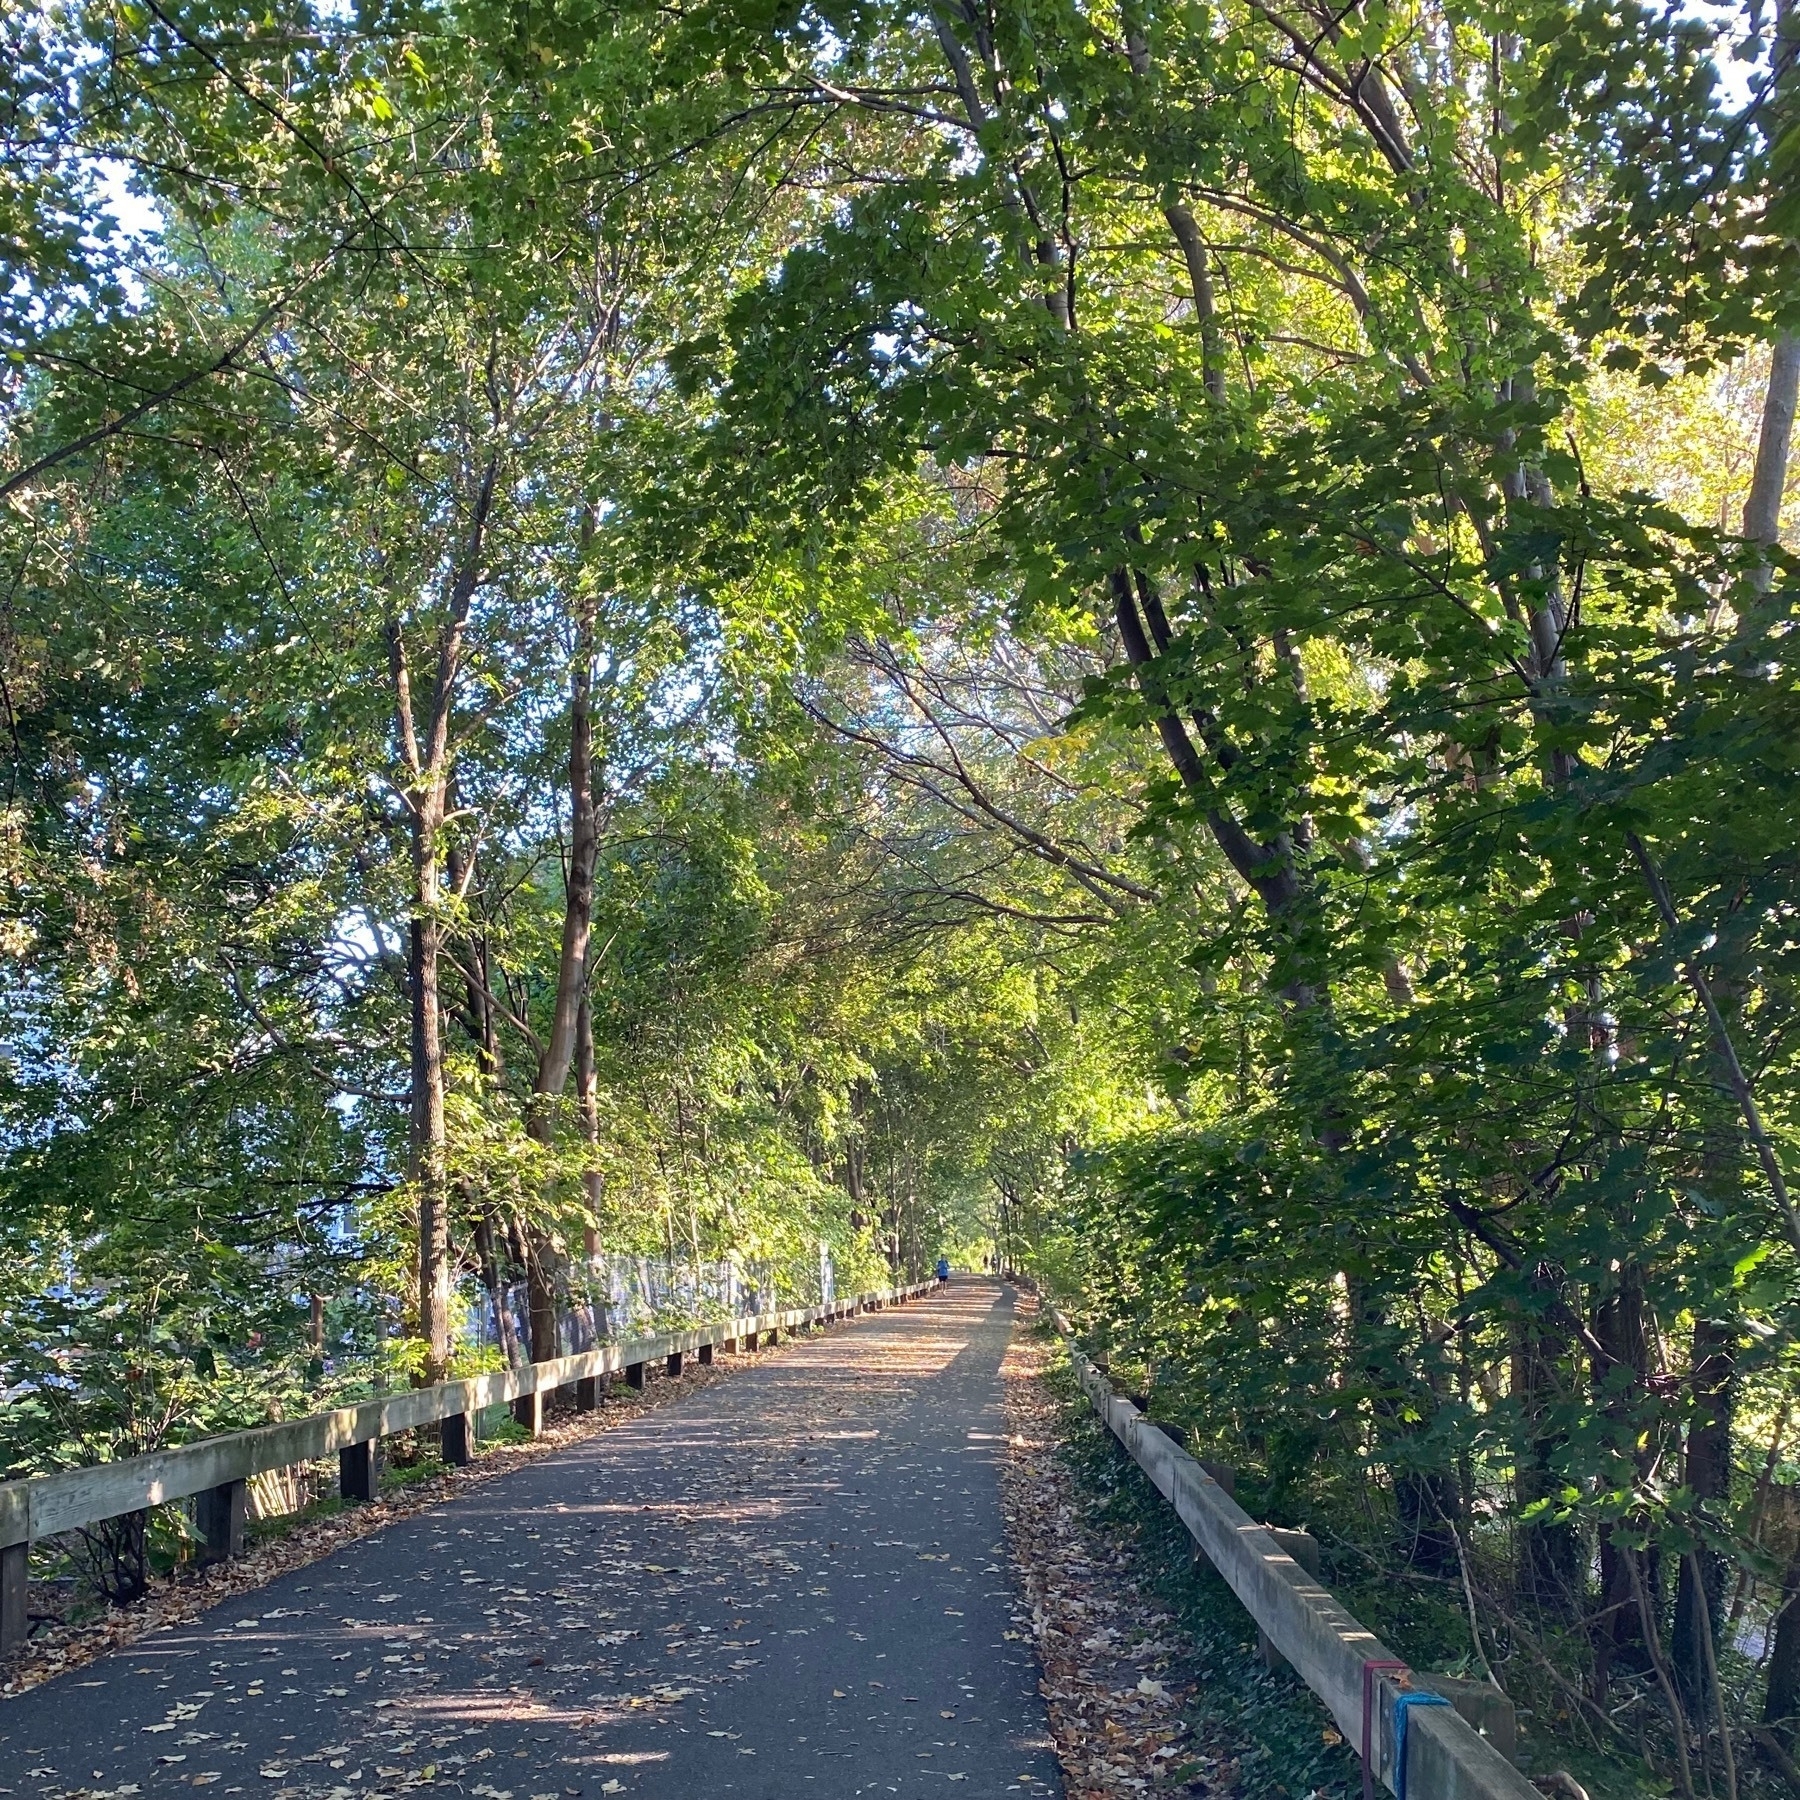 Afternoon view down an empty bike path with rails on either side and lined with green trees.